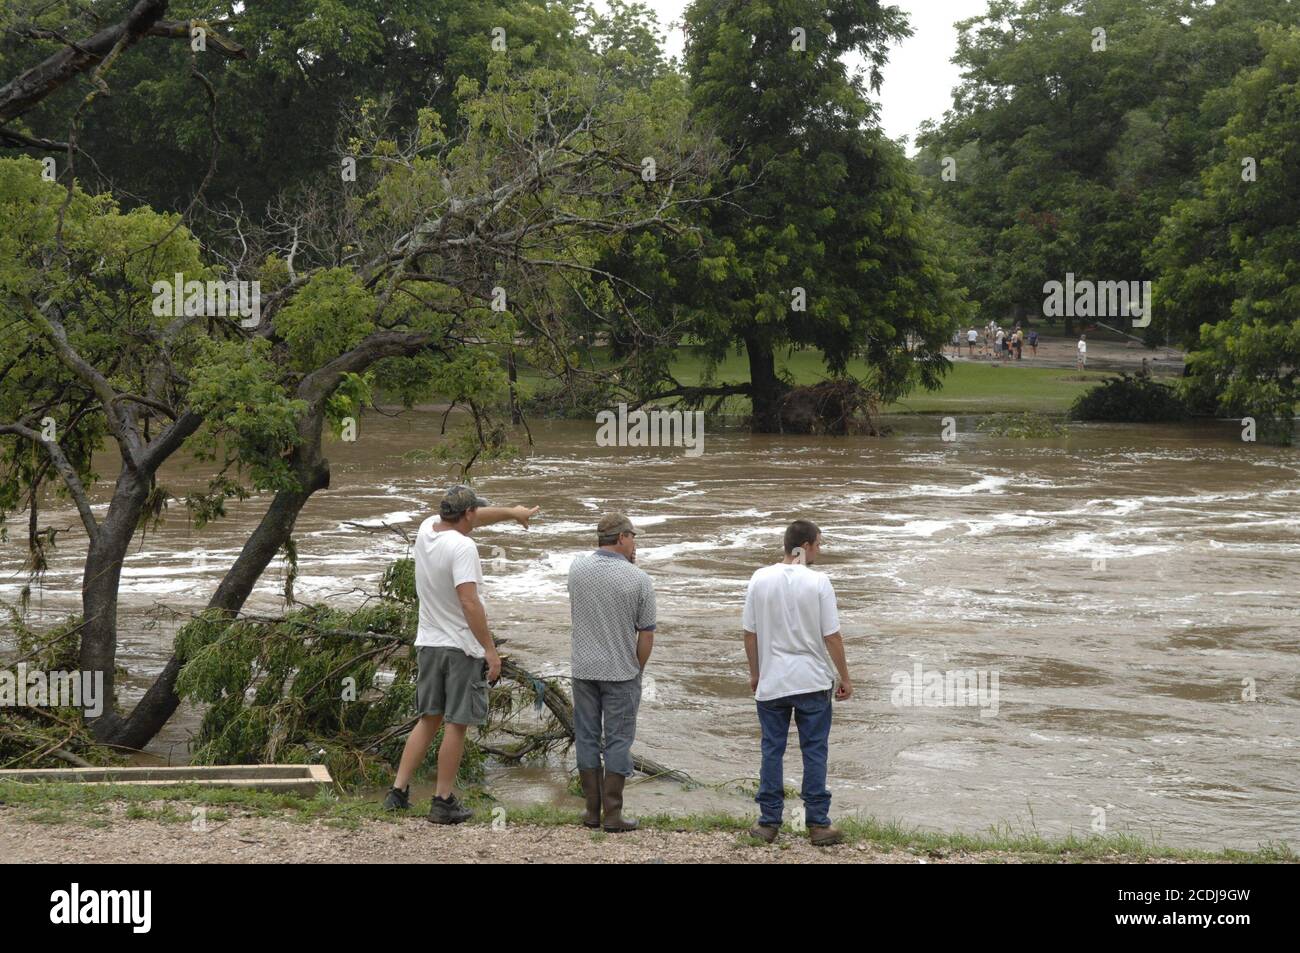 Marble Falls, TX  June 27, 2007:  Residents inspect normally placid Lake Marble Falls after up to 19 inches of rain in a few hours fell on the  area overnight. Flash flooding caused property damage in the millions as creeks overflowed an industrial area. No deaths were reported.        ©Bob Daemmrich Stock Photo